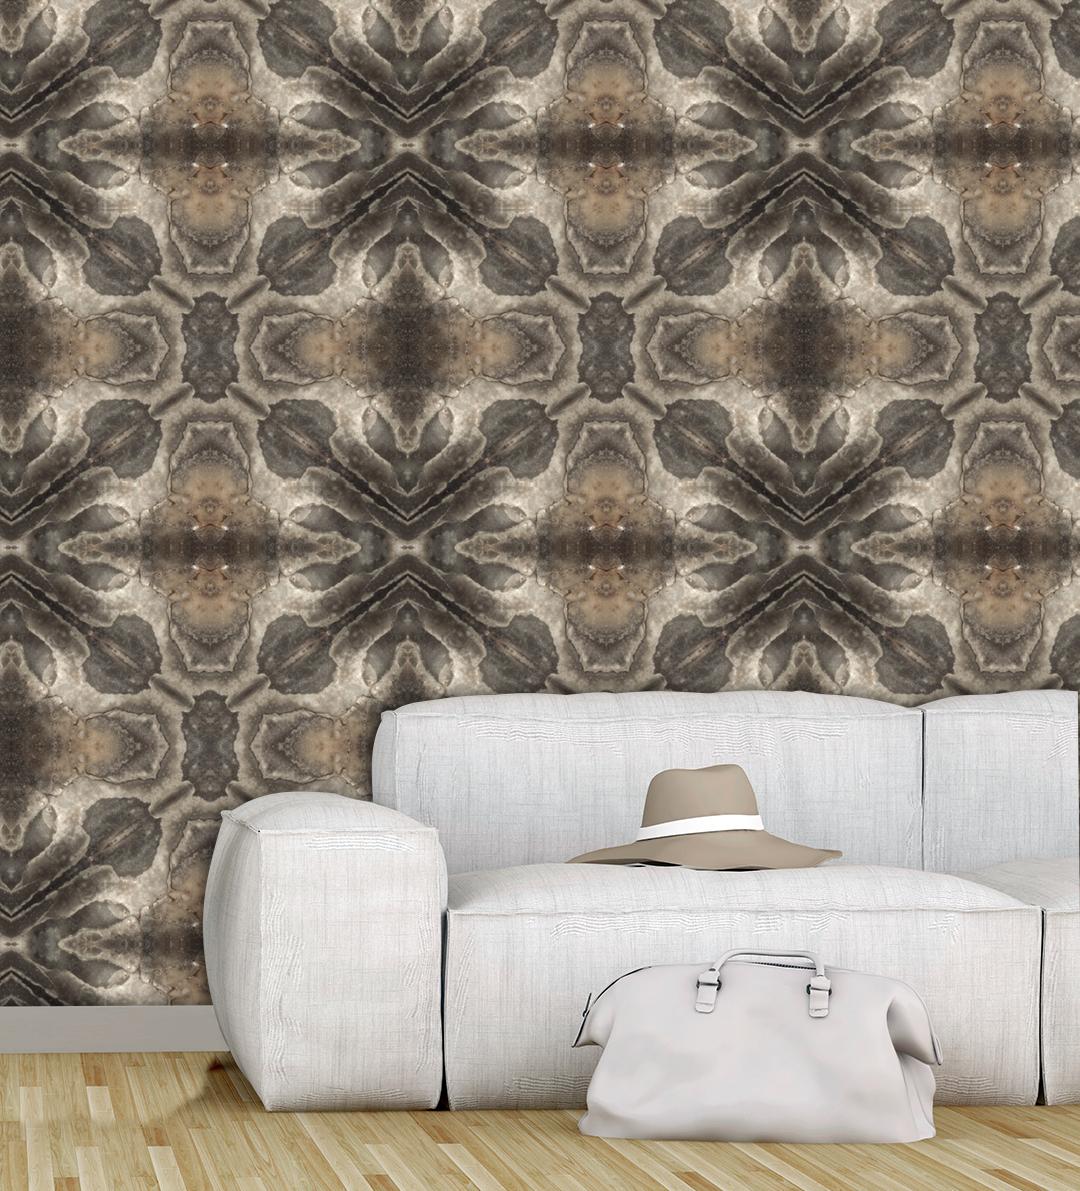 Humble Clam from our Collection no 5,  inspired by seashells, reflects the tranquility, natural beauty, and calmness of the seashore. The layers of neutral tones create a depth and texture evoking the different shades and patterns found in